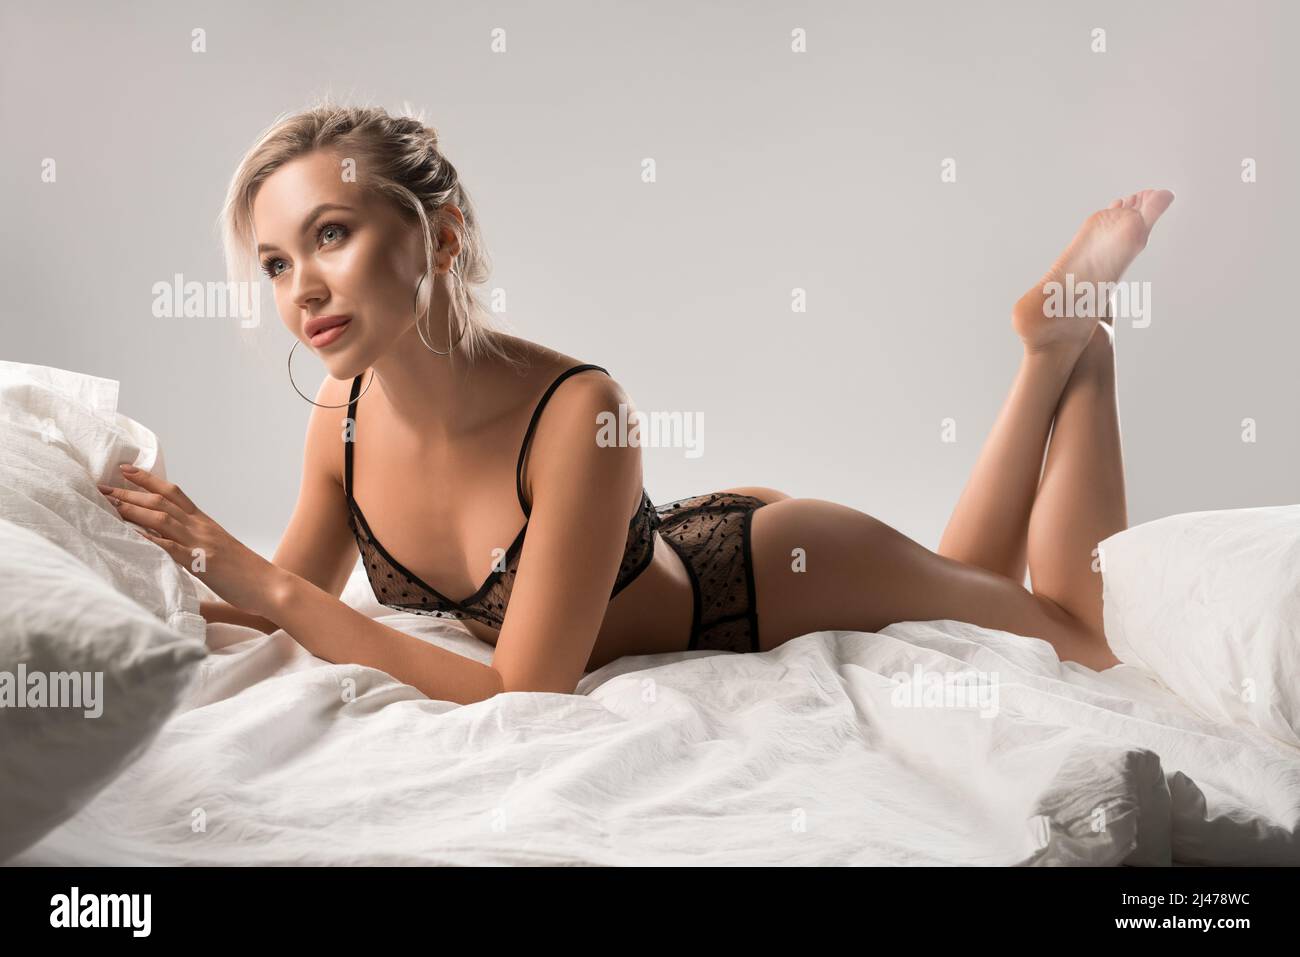 Dreamy sensual woman in black lingerie lying on bed Stock Photo